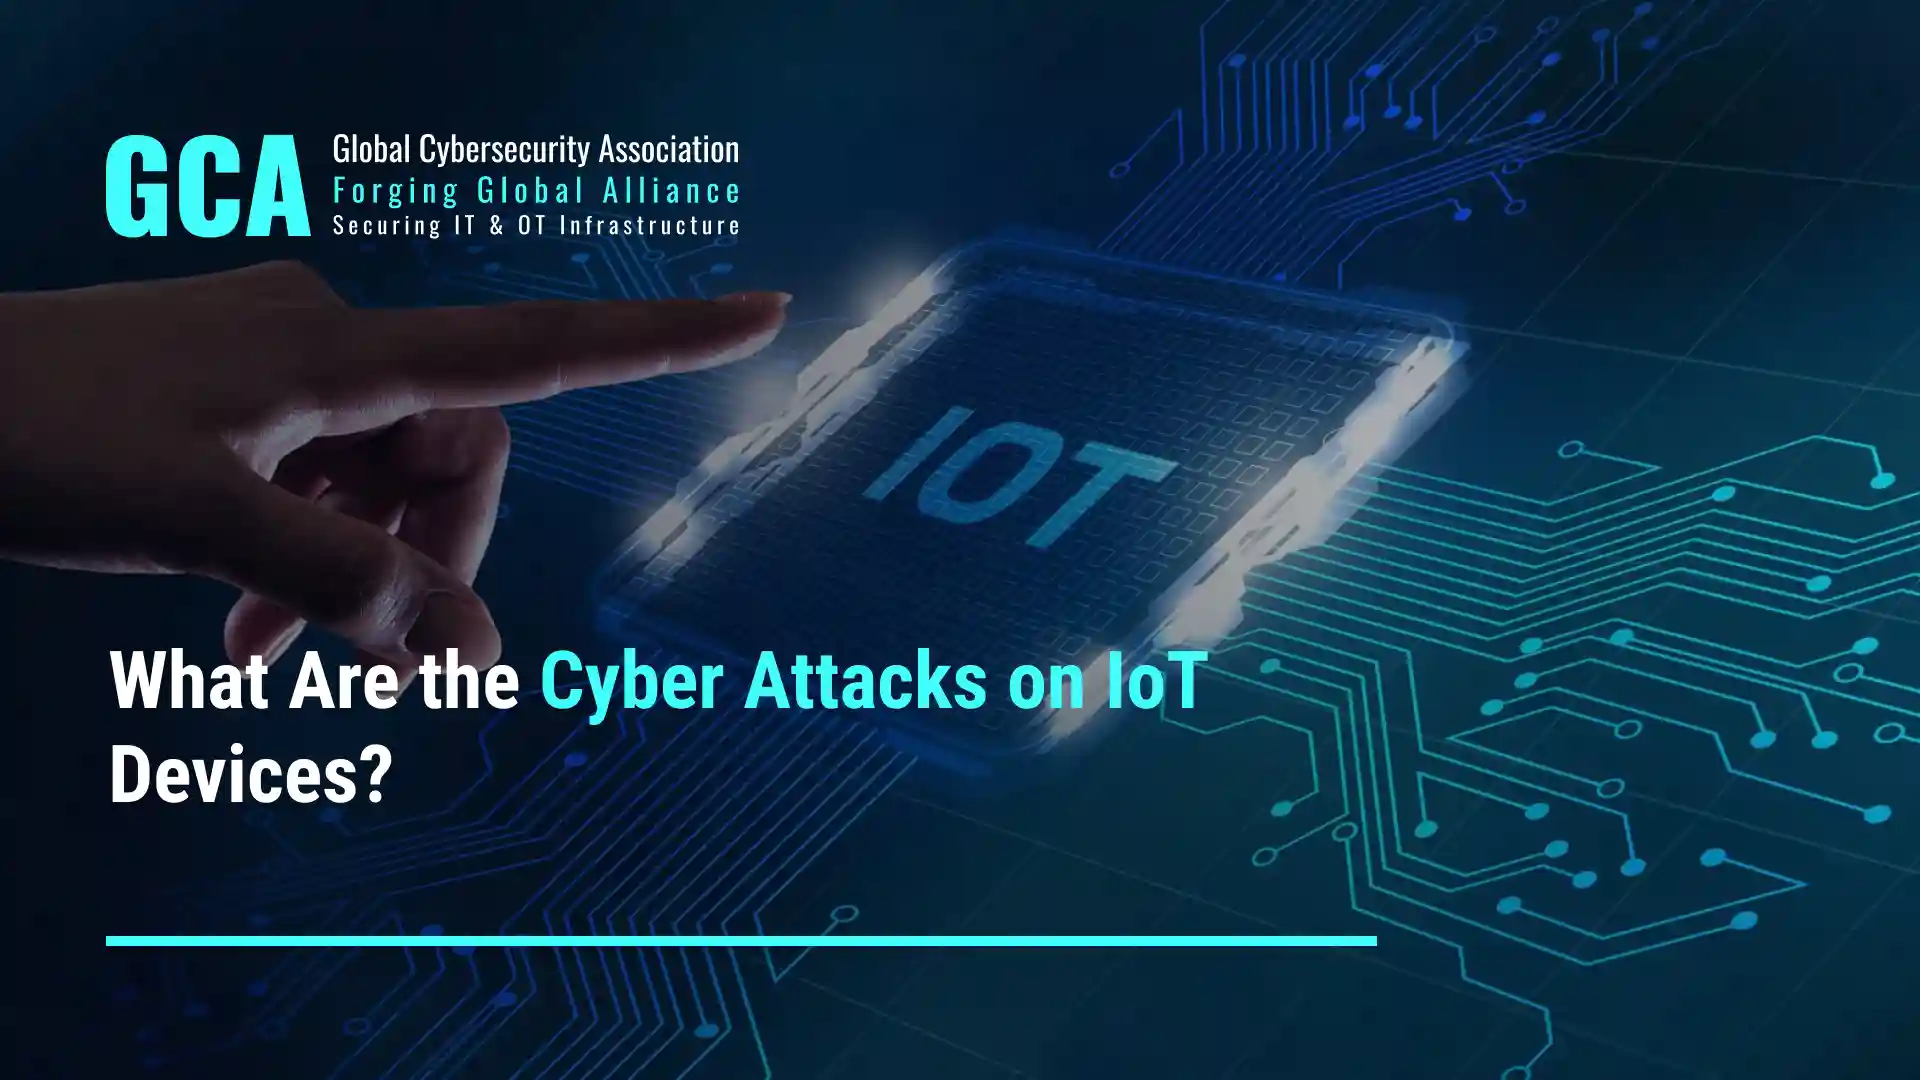 What Are the Cyber Attacks on IoT Devices